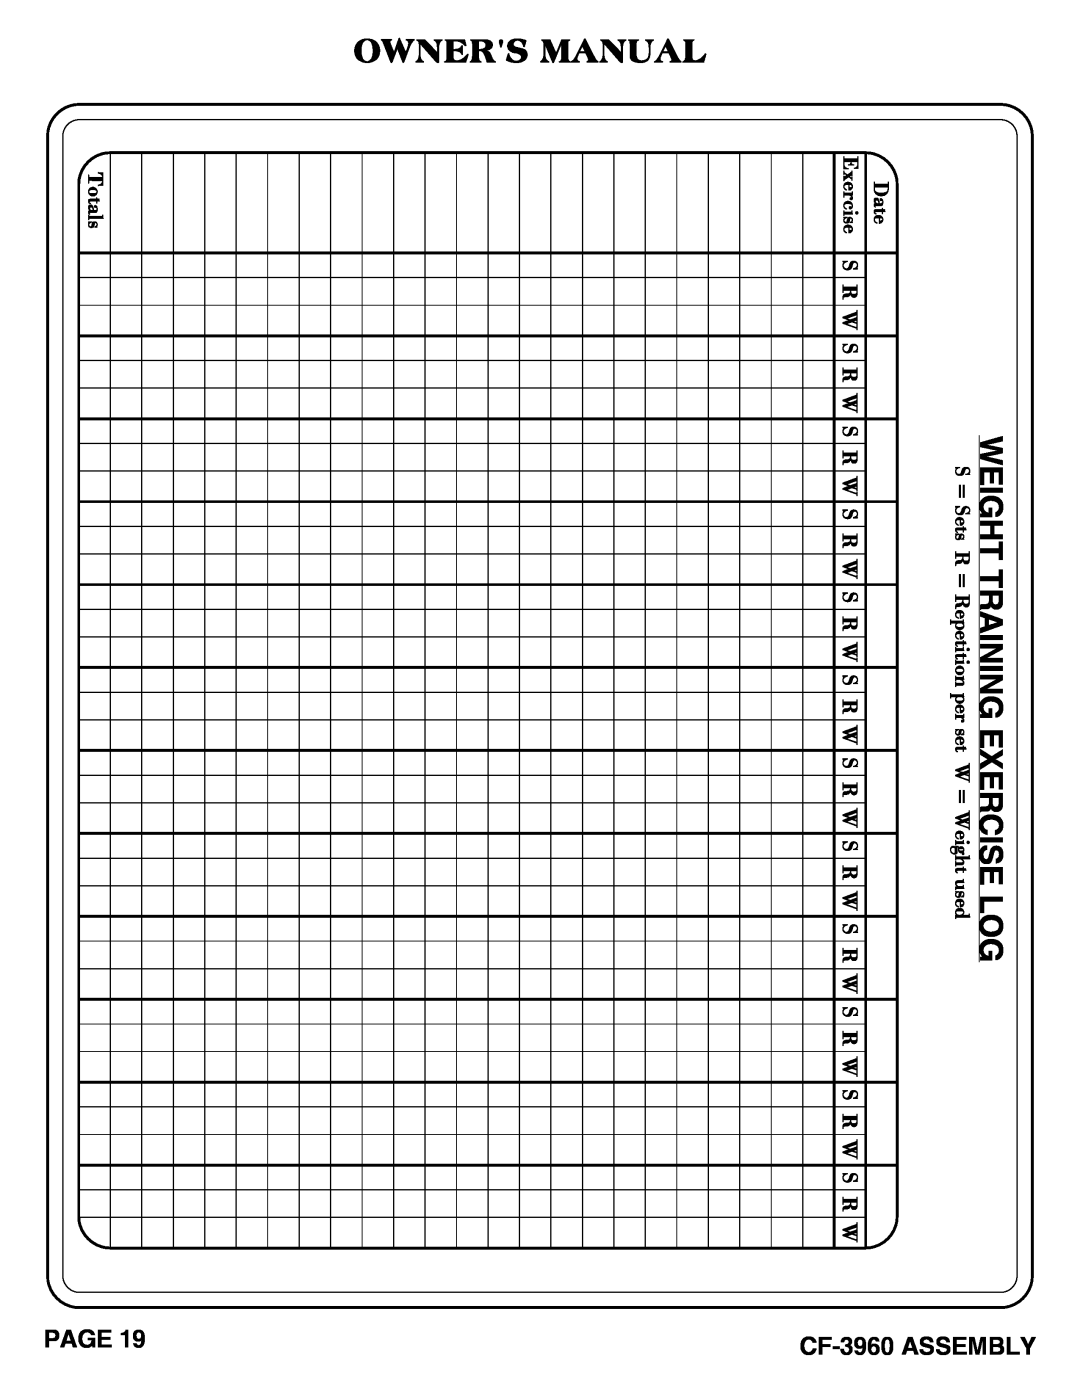 Hoist Fitness Weight Training Exercise Log, CF-3960 ASSEMBLY PAGE, S = Sets R = Repetition per set W = Weight used 